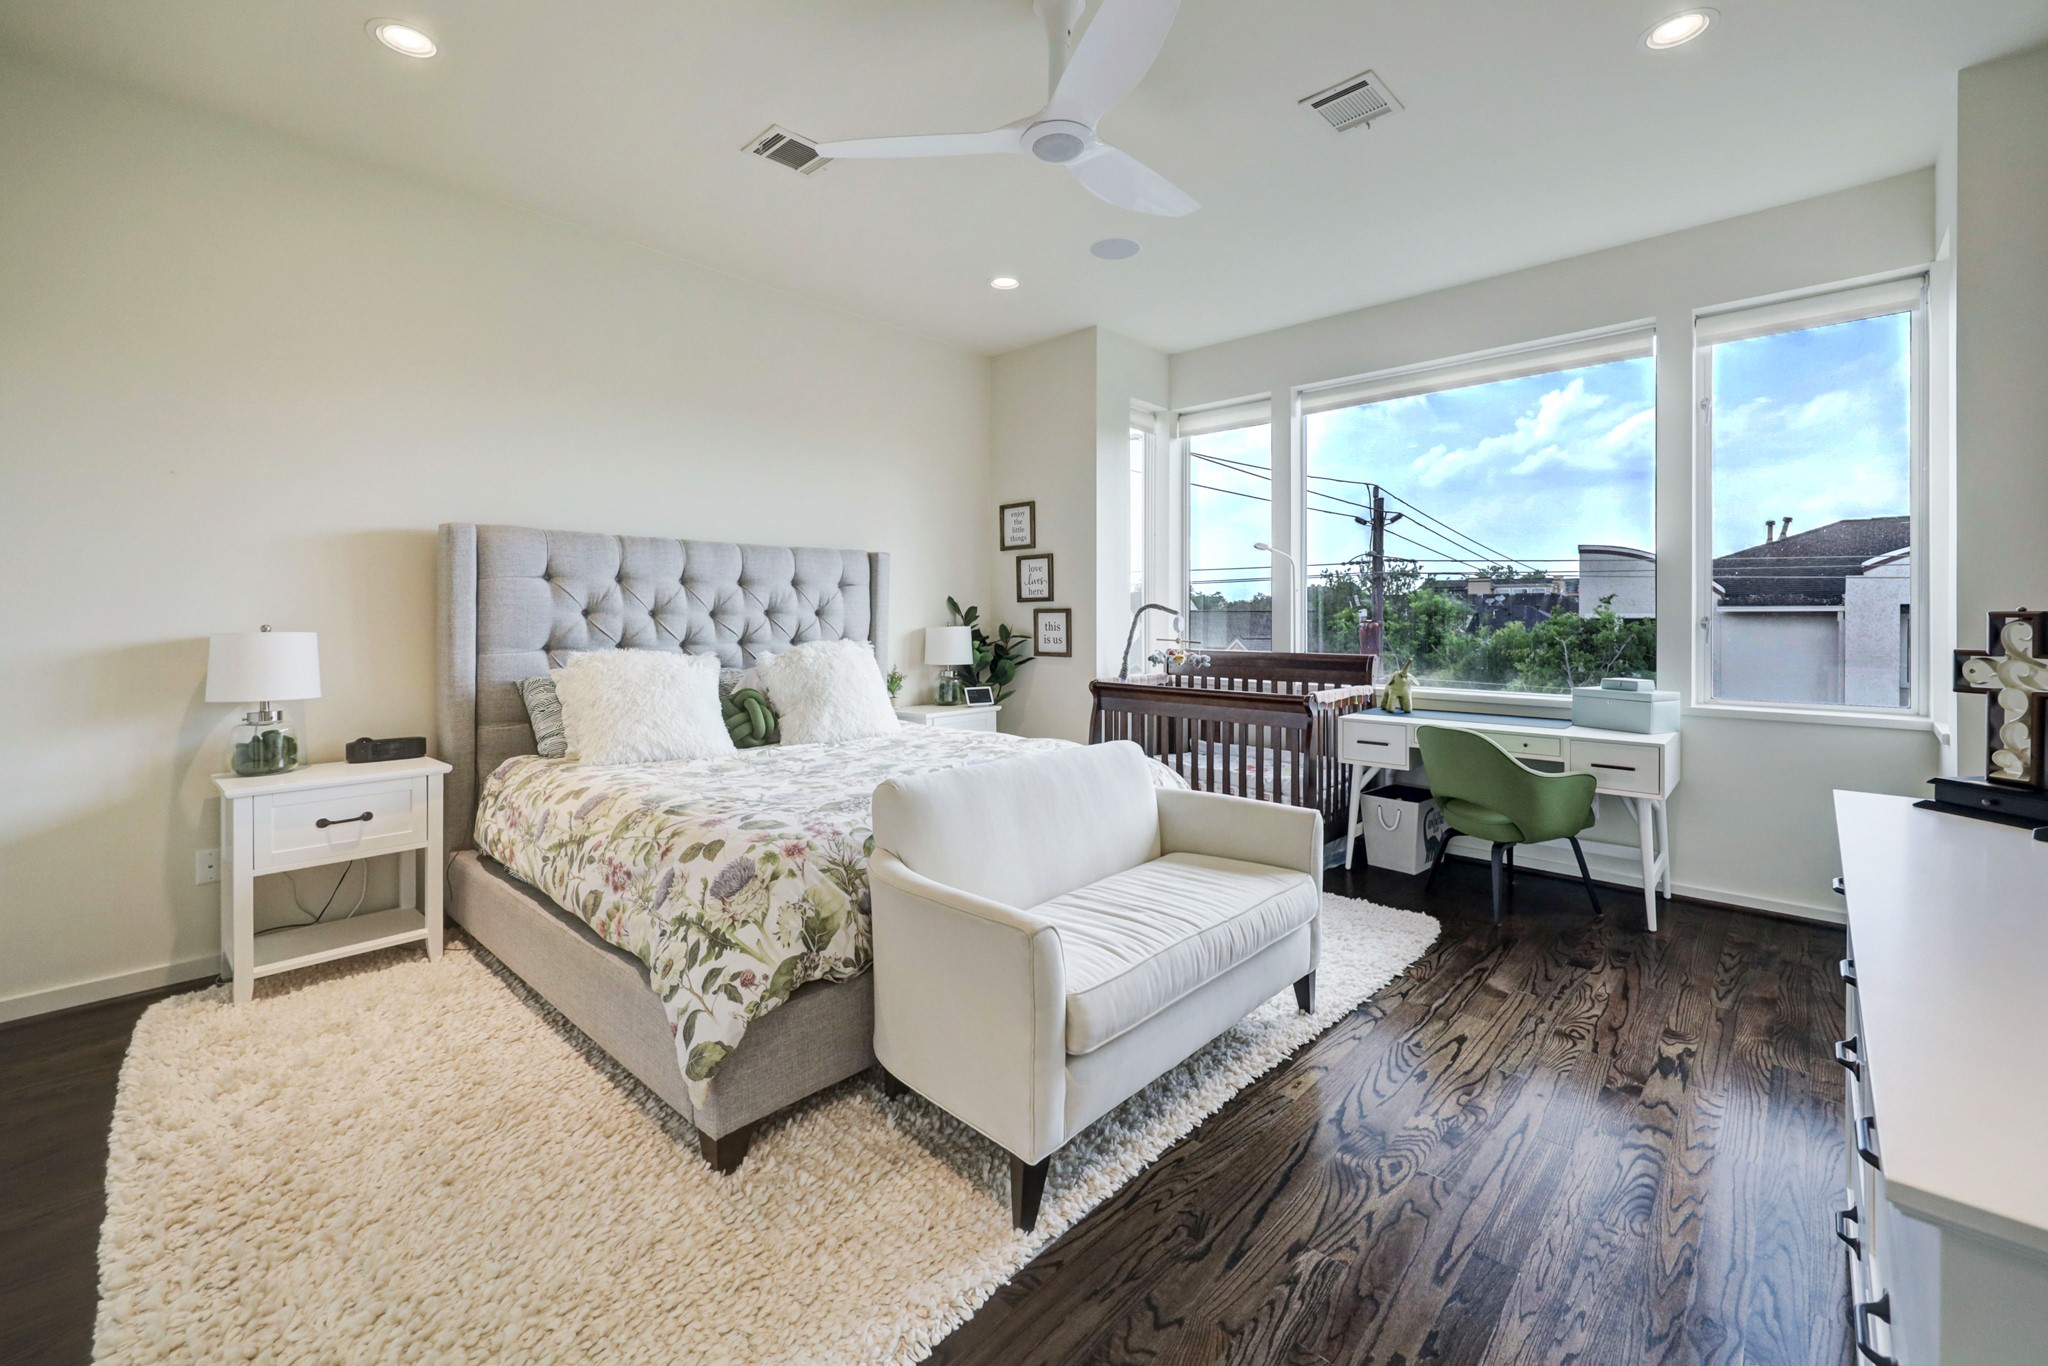 Primary bedroom is to die for. Hardwood floors, large windows, high ceilings and three closets